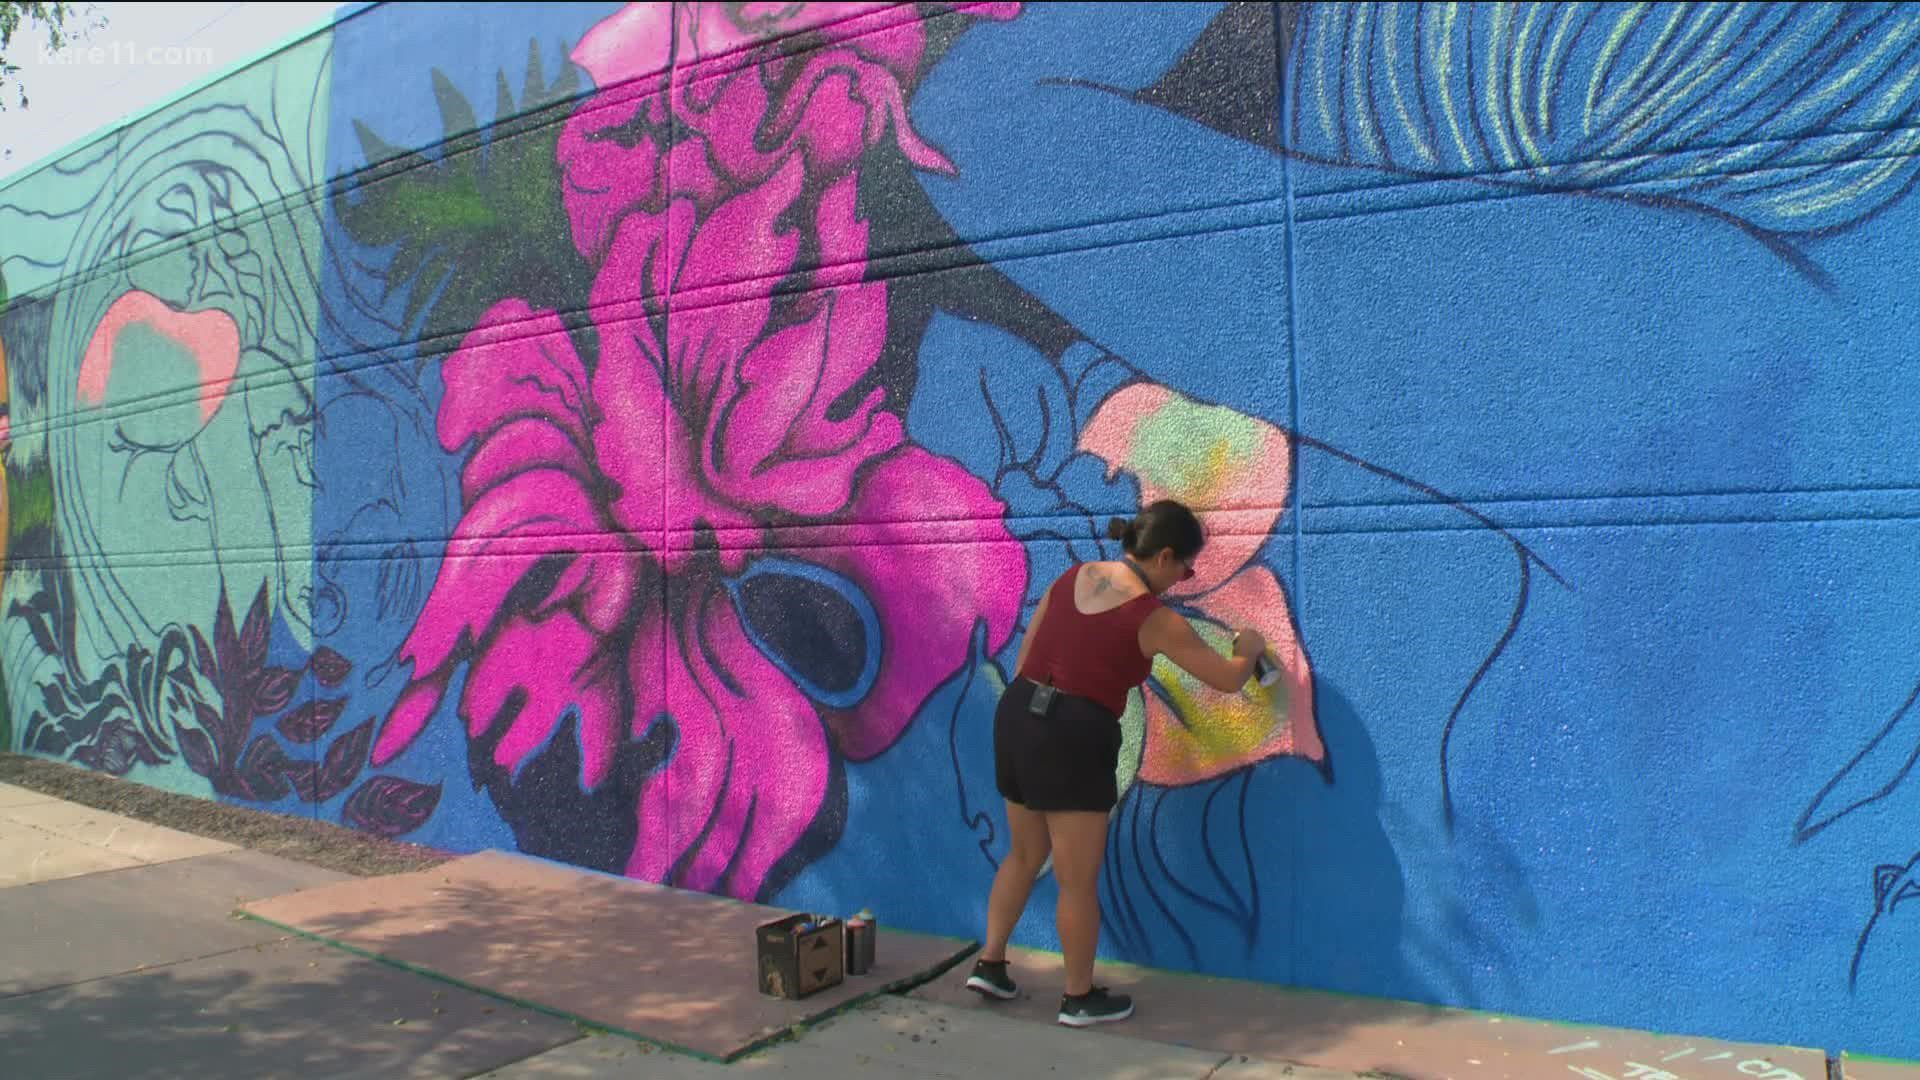 Local visual artists are currently working on the WE mural, located in the South Loop neighborhood of Bloomington